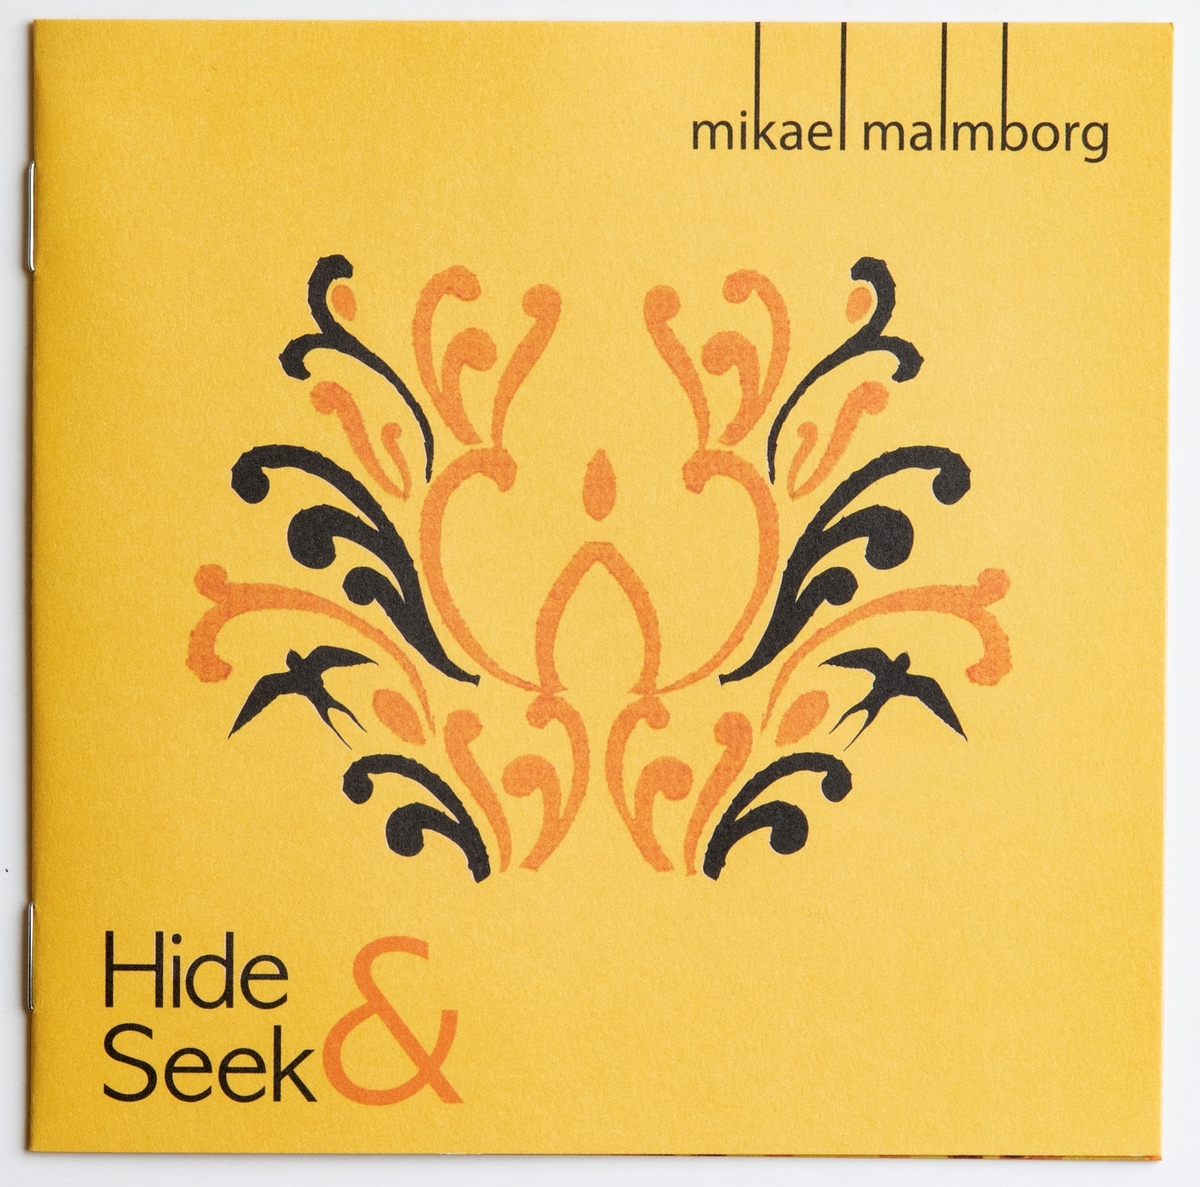 CD-skiva, musik med Mikael Malmborg. Skiva i fodral av plast och papp med booklet (häfte).

Innehåll:
1. Our song
2. What Would You Say
3. Miss Wily
4. No Guarantee
5. Hide And Seek
6. Keep On Sing
7. Lovisa
8. This is War
9. Let's Stay For Another Day
10. Get A Good Hold Of Your Friend

JM 55309:1, Skiva
JM 55309:2, Fodral
JM 55309:3, Booklet